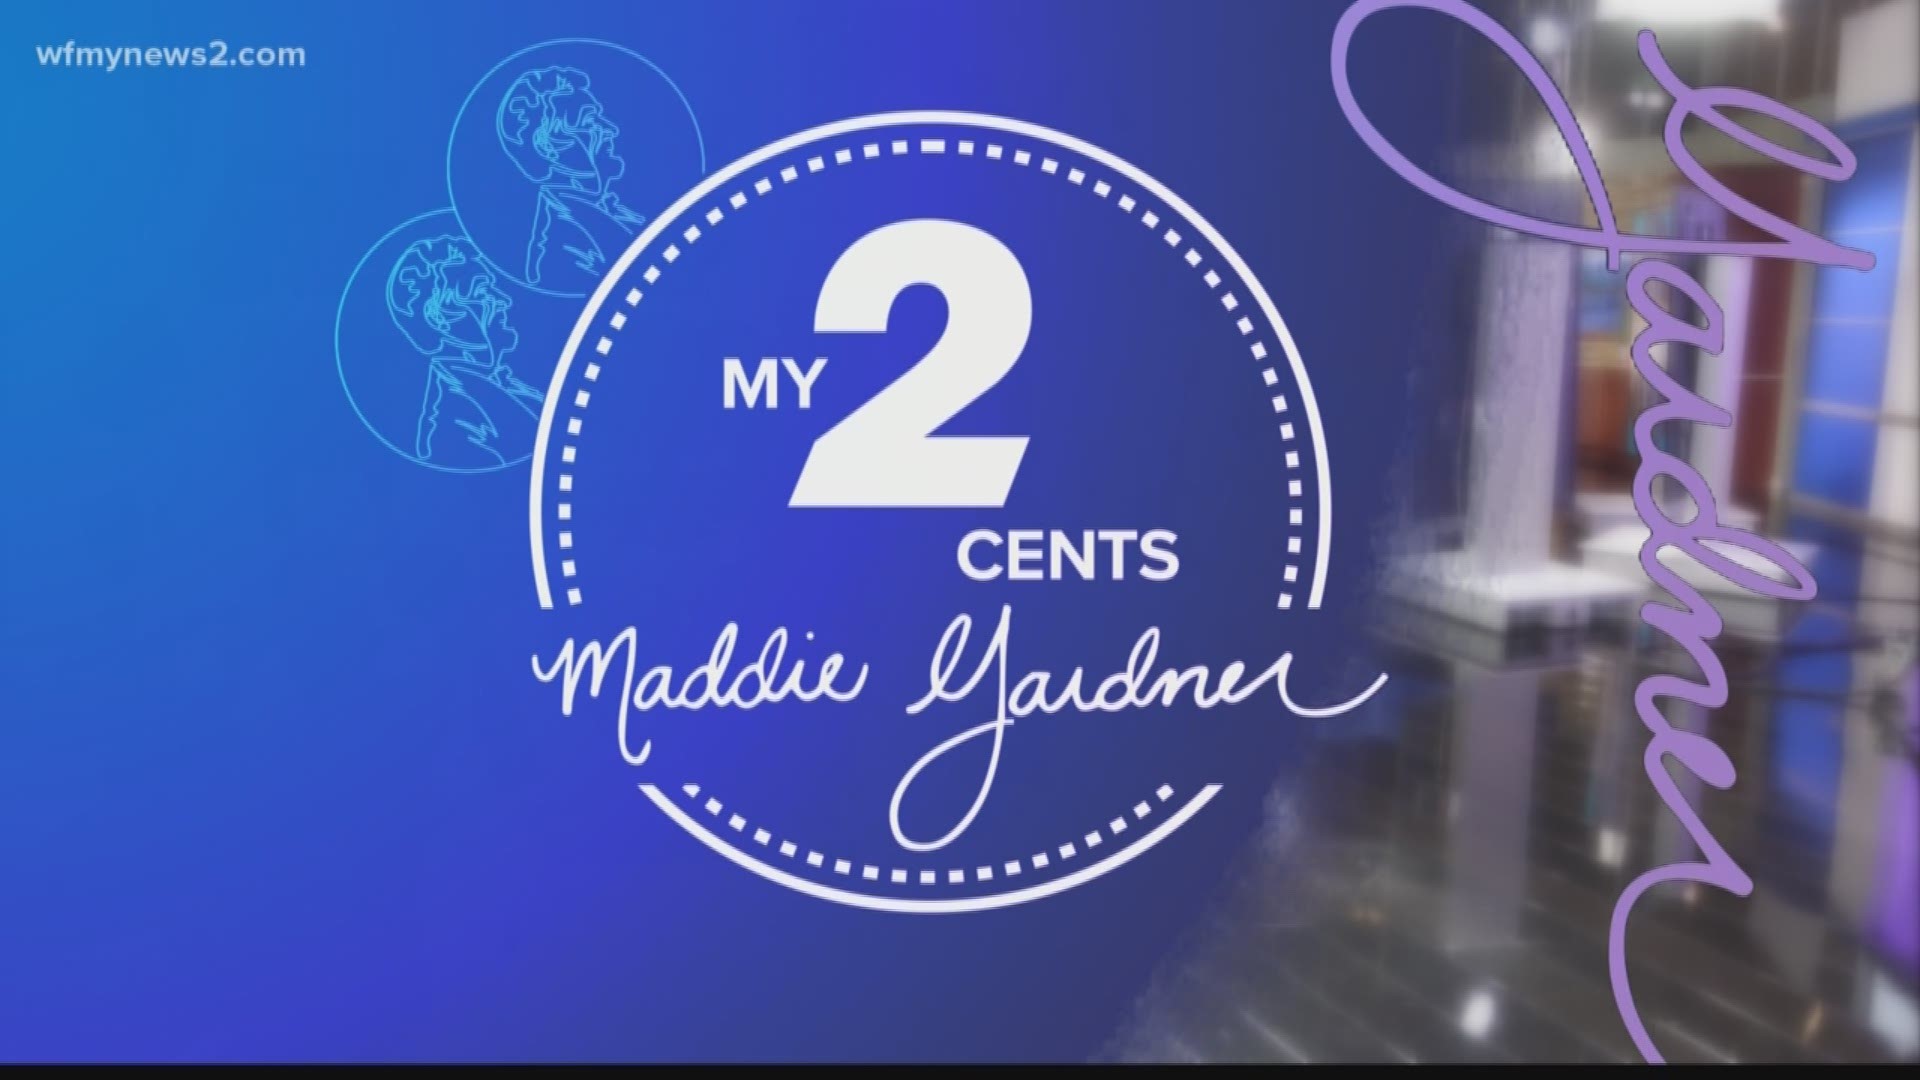 Maddie Gardner gives her "2 cents" on how many Cyber Monday ads she gets in her email box.